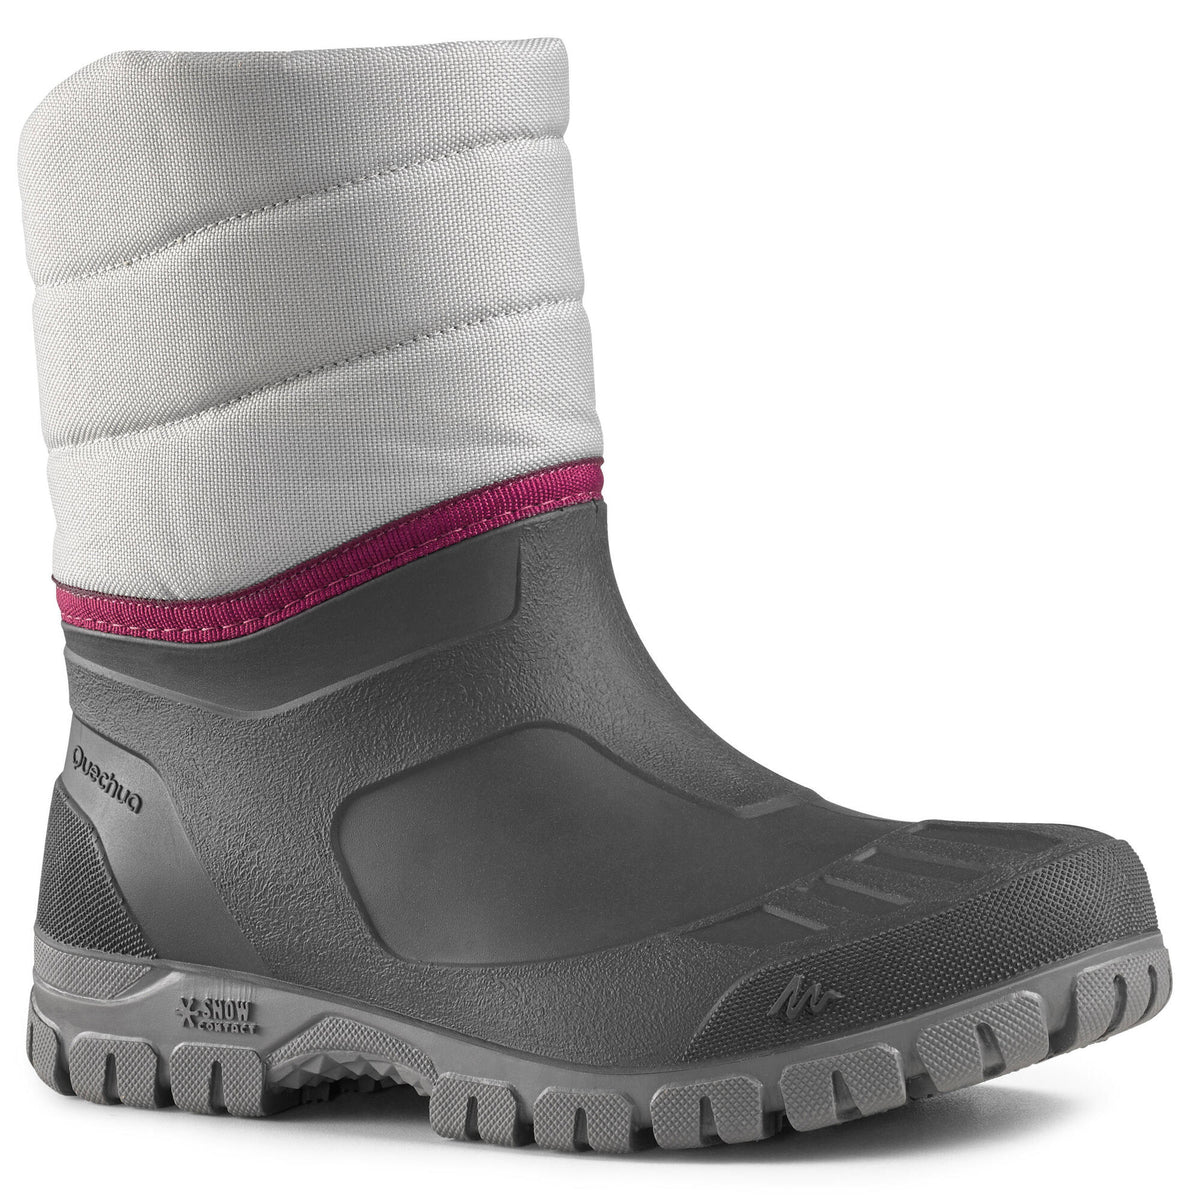 Women's warm waterproof snow hiking boots - SH100 mid Quechua Explore a  wide range of possibilities: Browse our extensive selection